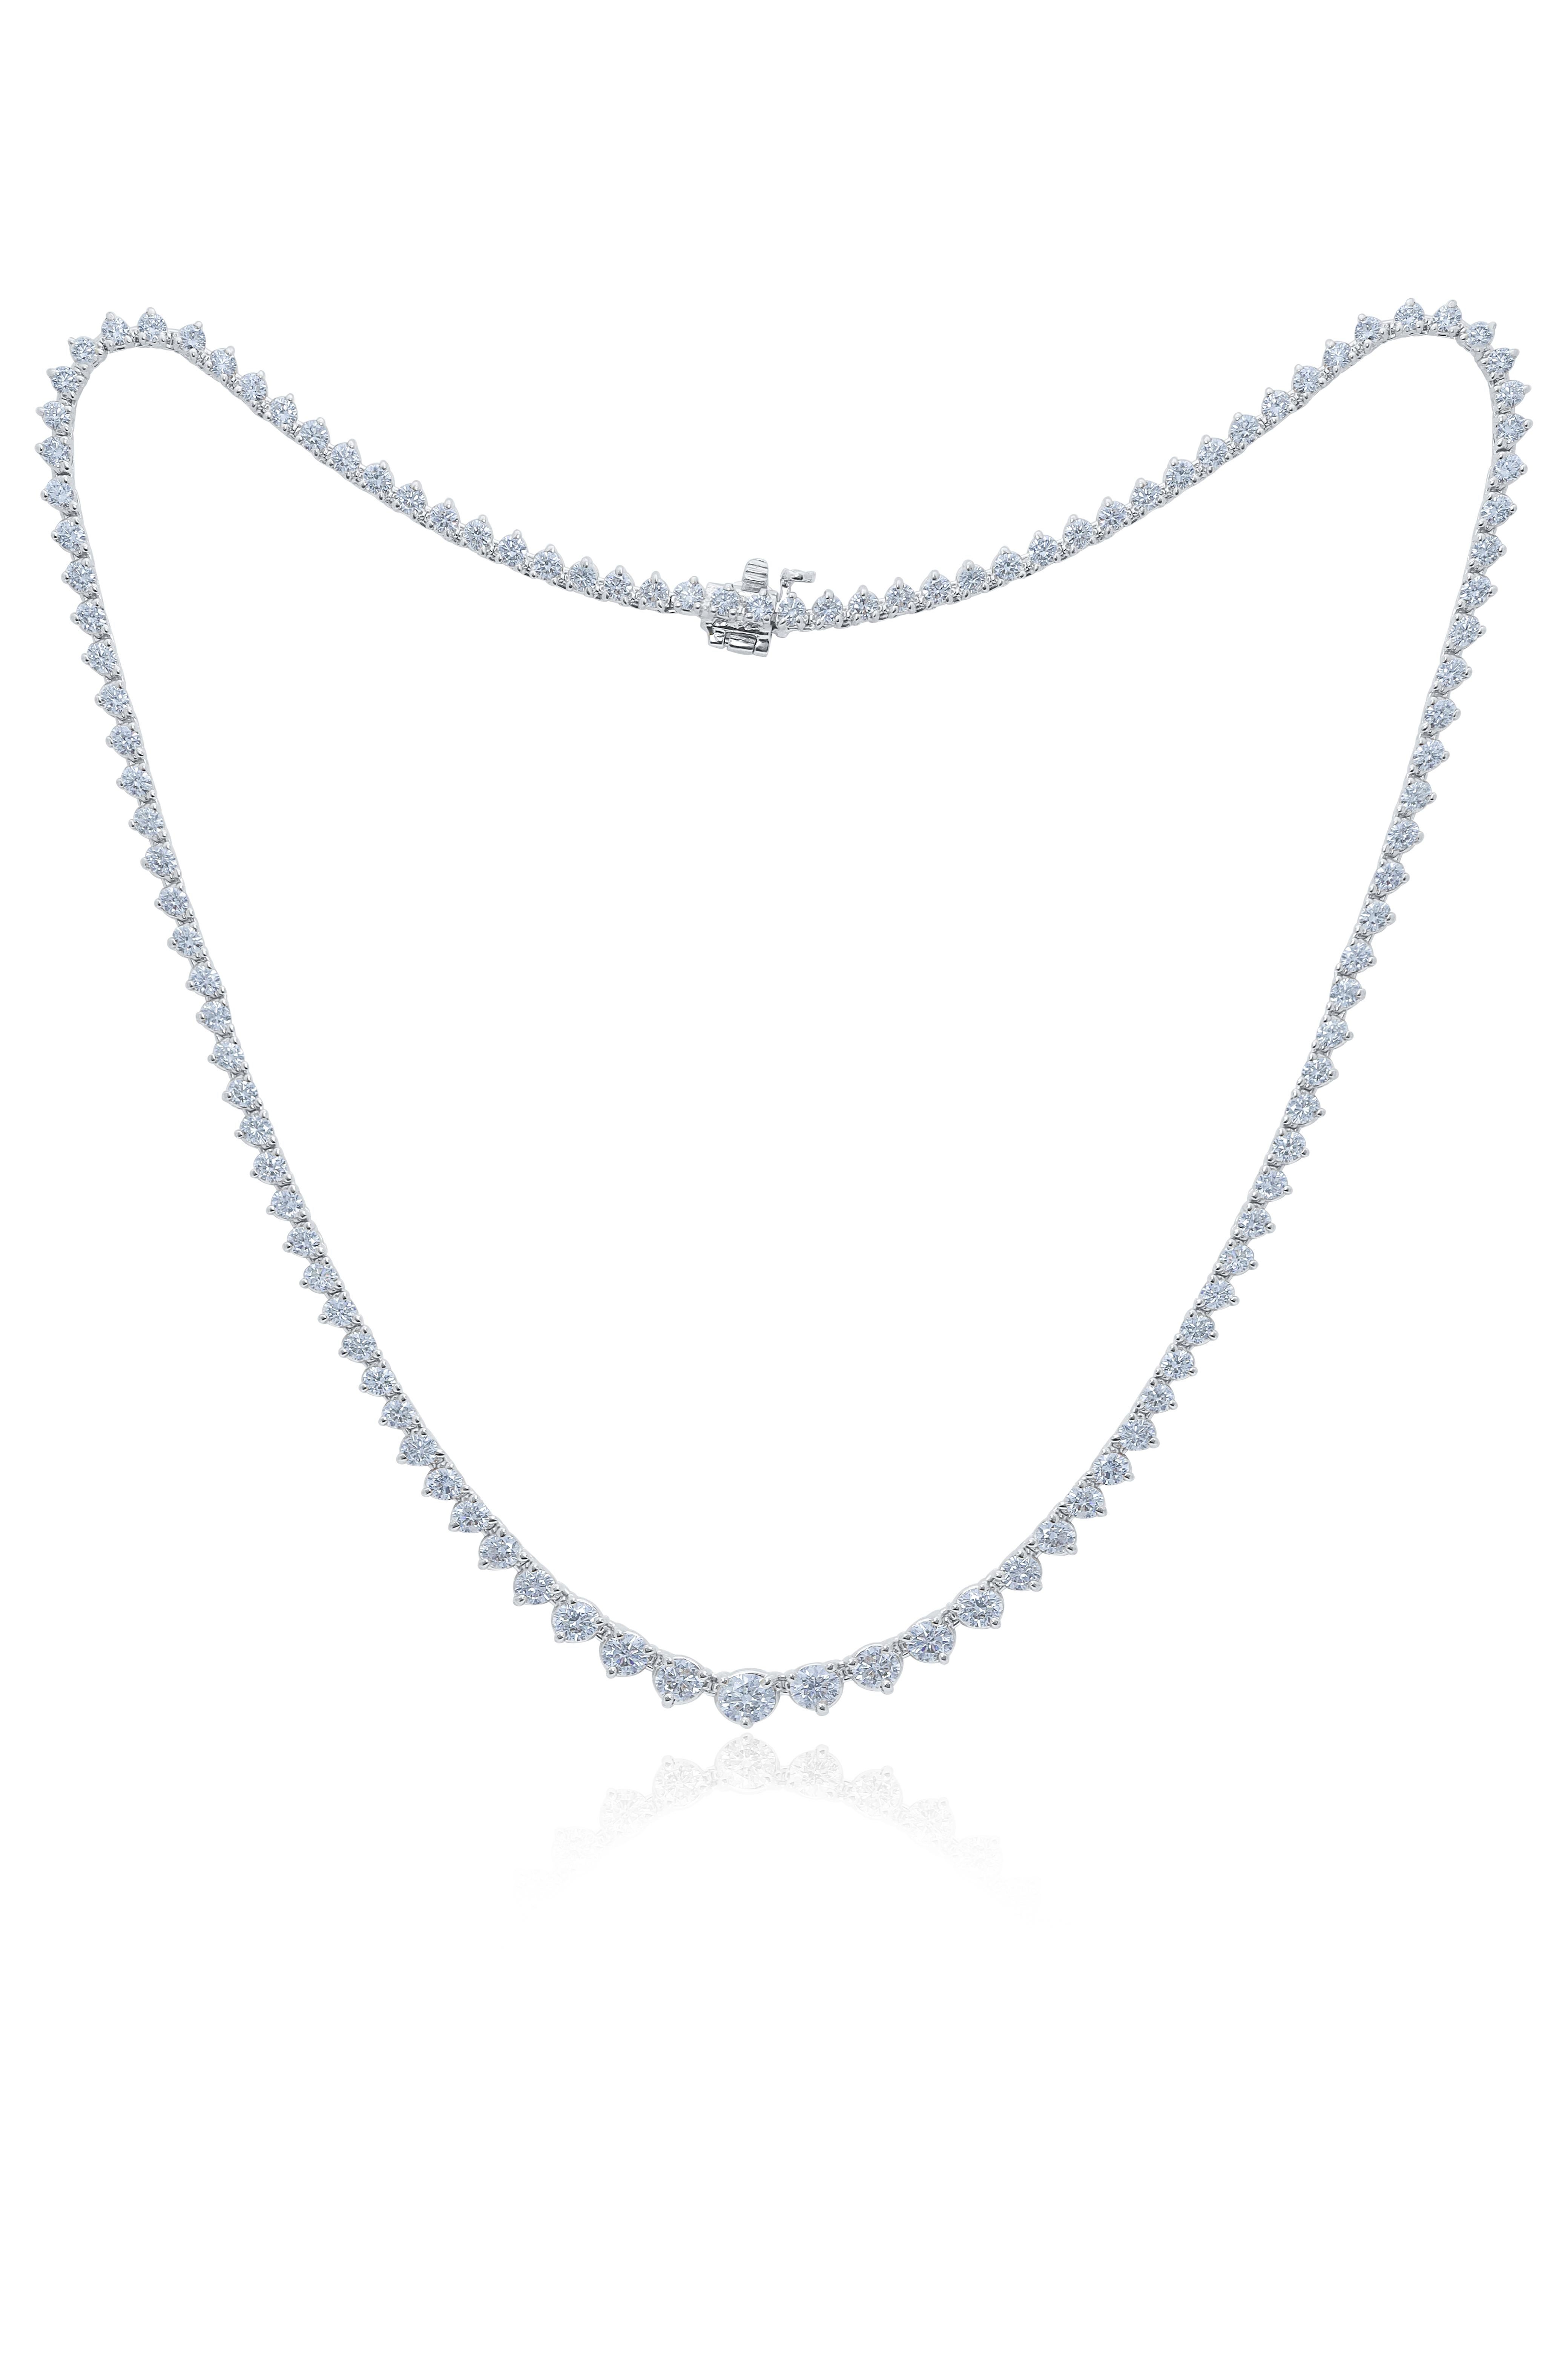 Round Cut Diana M. 18kt White Gold Graduated Riviera Tennis  Necklace  16.35 cts 16.5